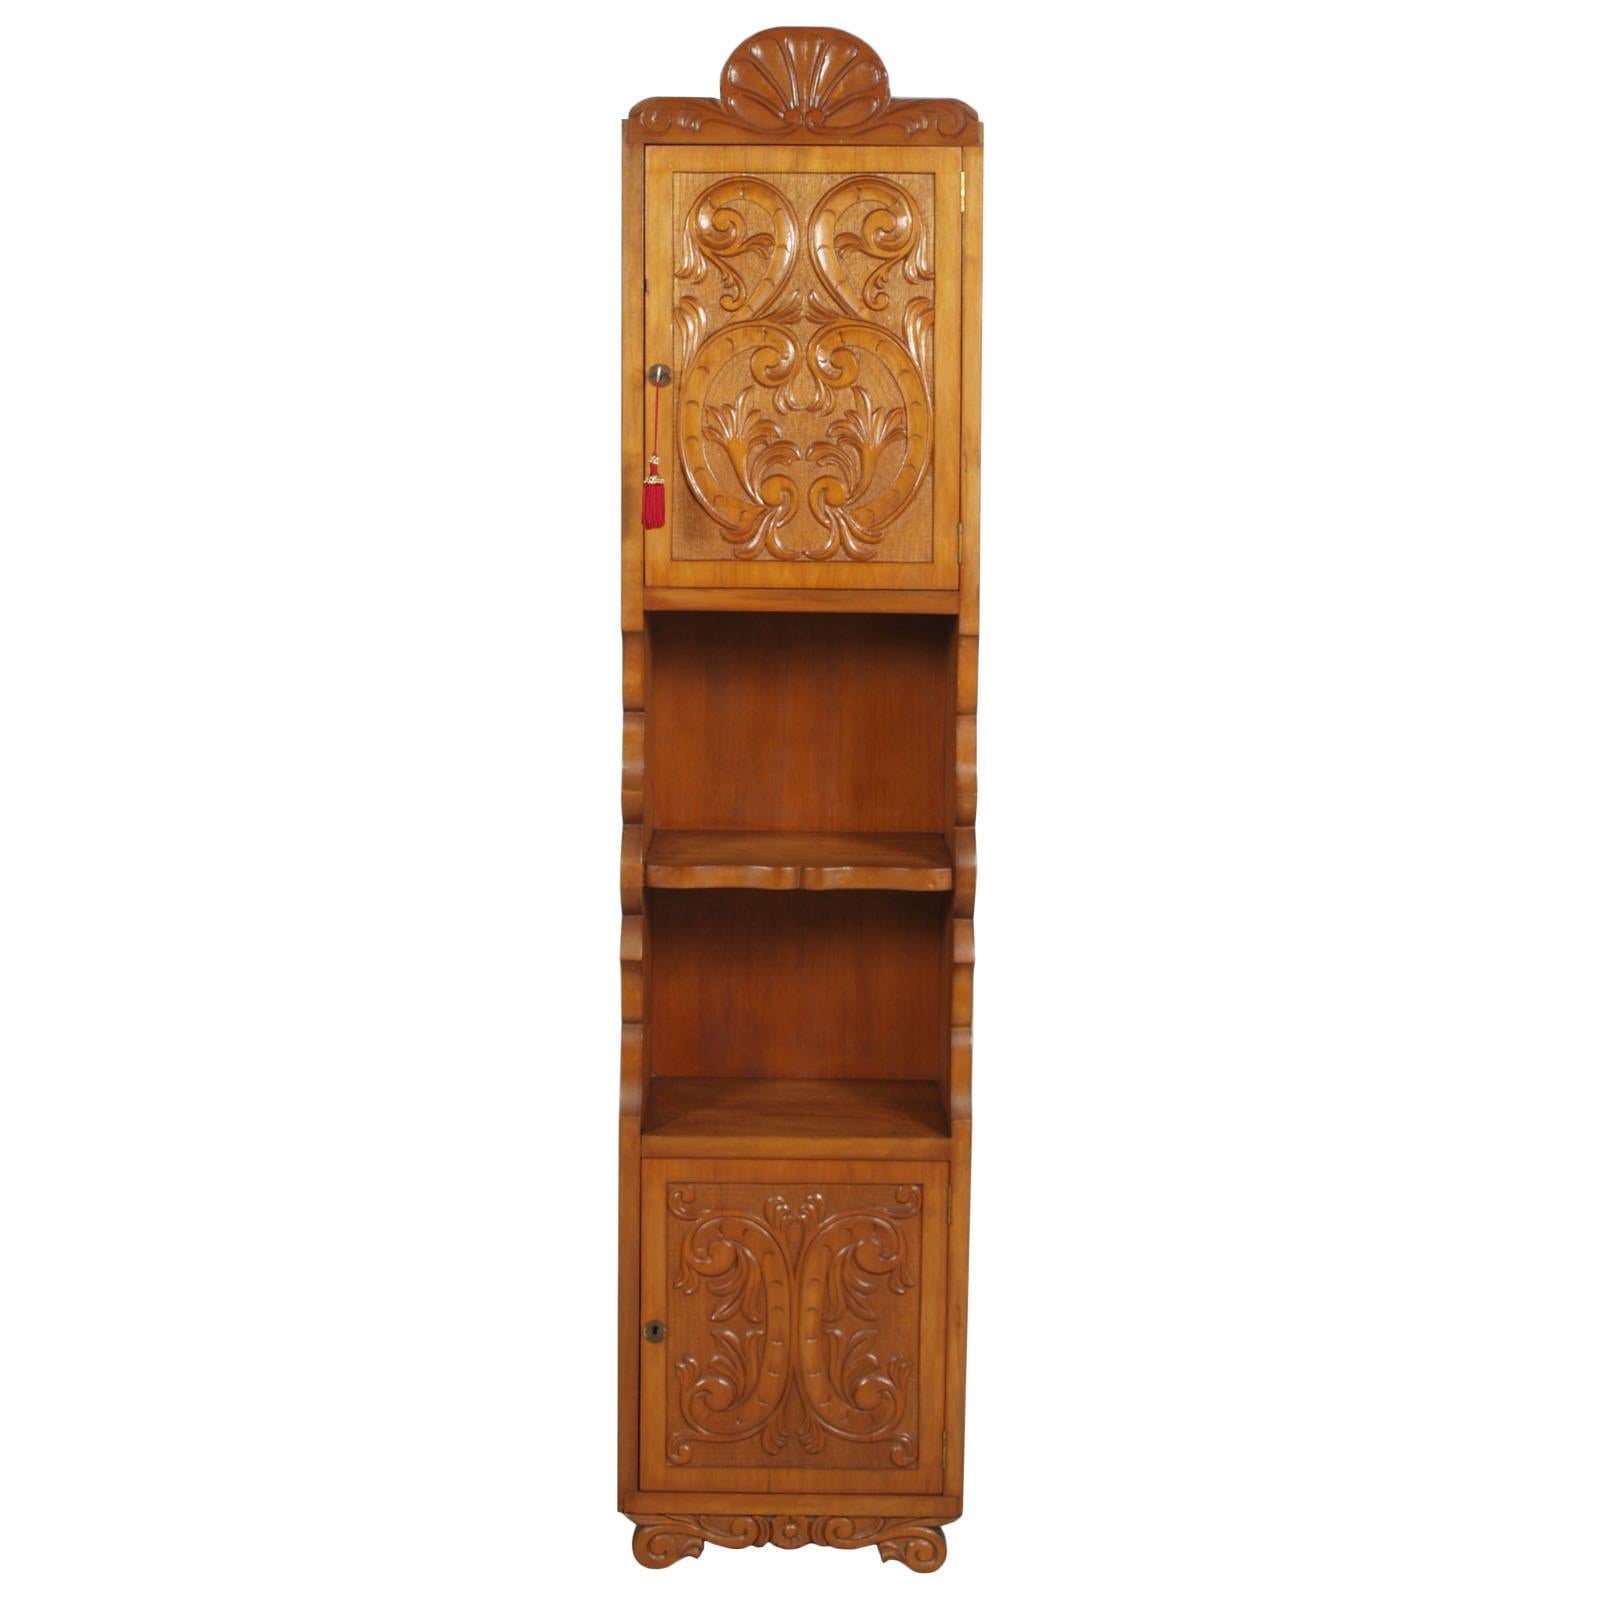 Simply spectacular Italian display column cabinet, bookcase , diffusely hand carved with classical renaissance motifs, wax-polished
A precious column aesthetically and as a quality of execution, from of artistic carvers of Bassano's Ebanisteria
Due